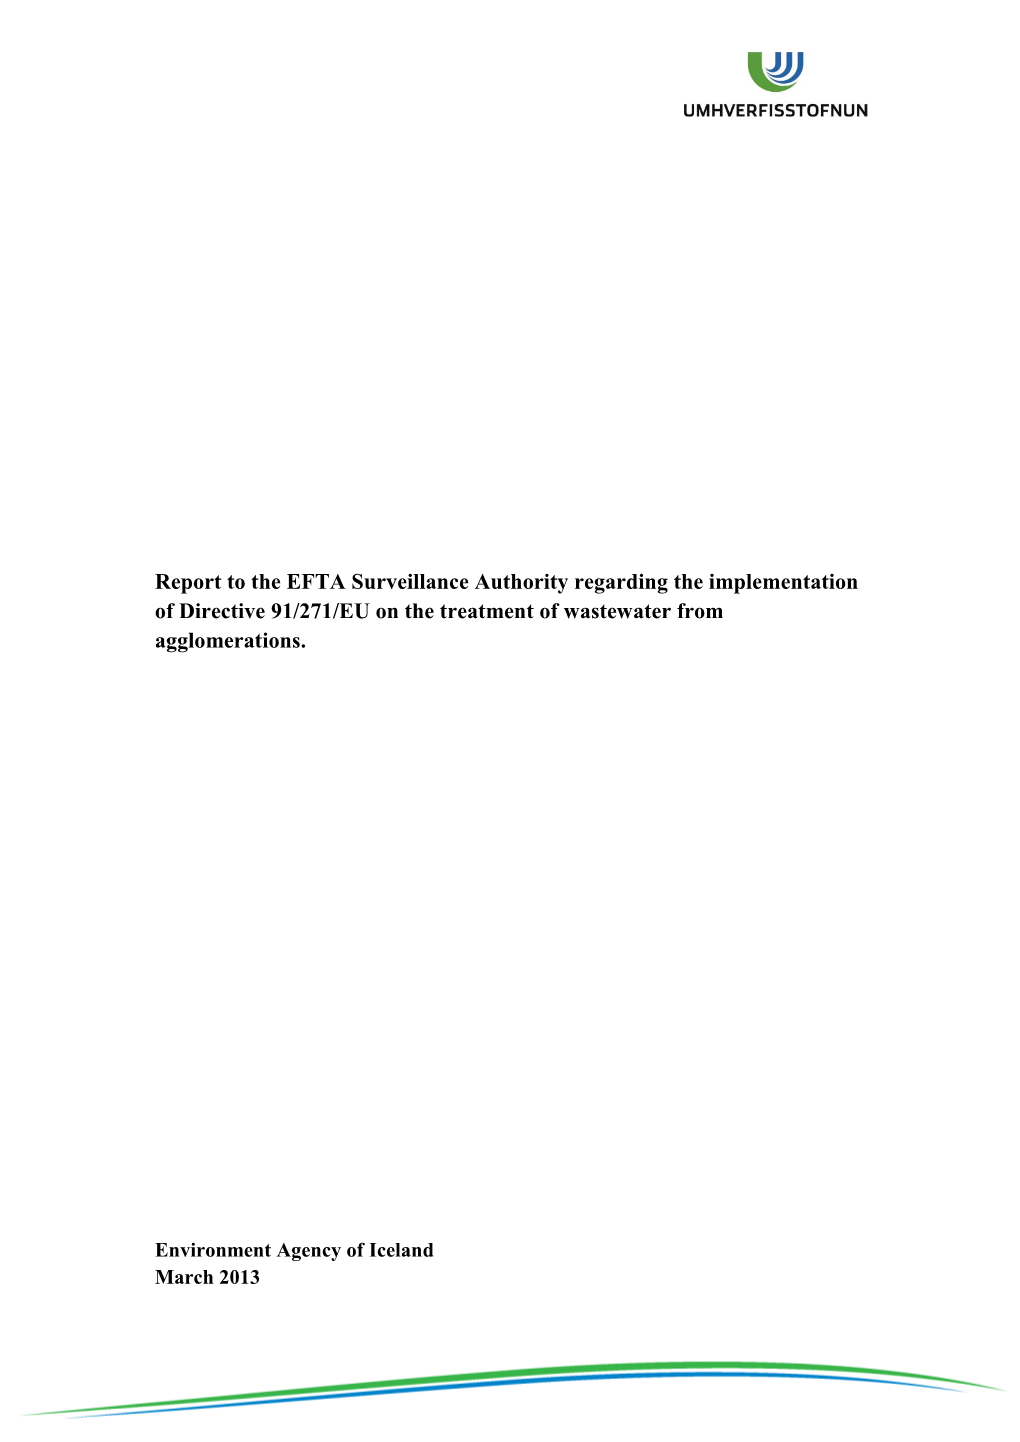 Report to the EFTA Surveillance Authority Regarding the Implementation of Directive 91/271/EU on the Treatment of Wastewater from Agglomerations